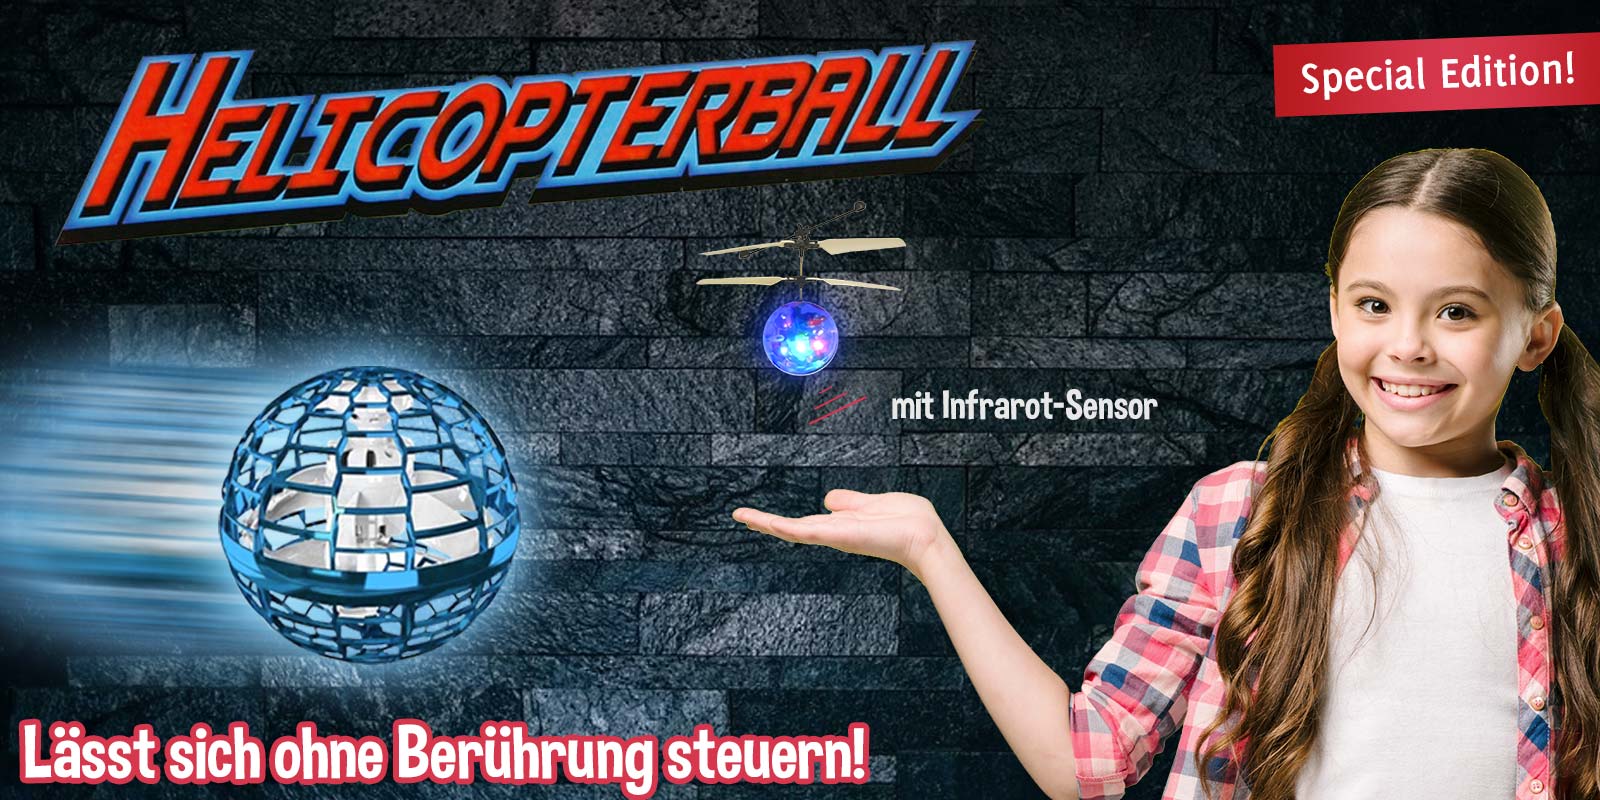 Helicopter Ball & Ufo Ball - Spielzeug Trends 2022